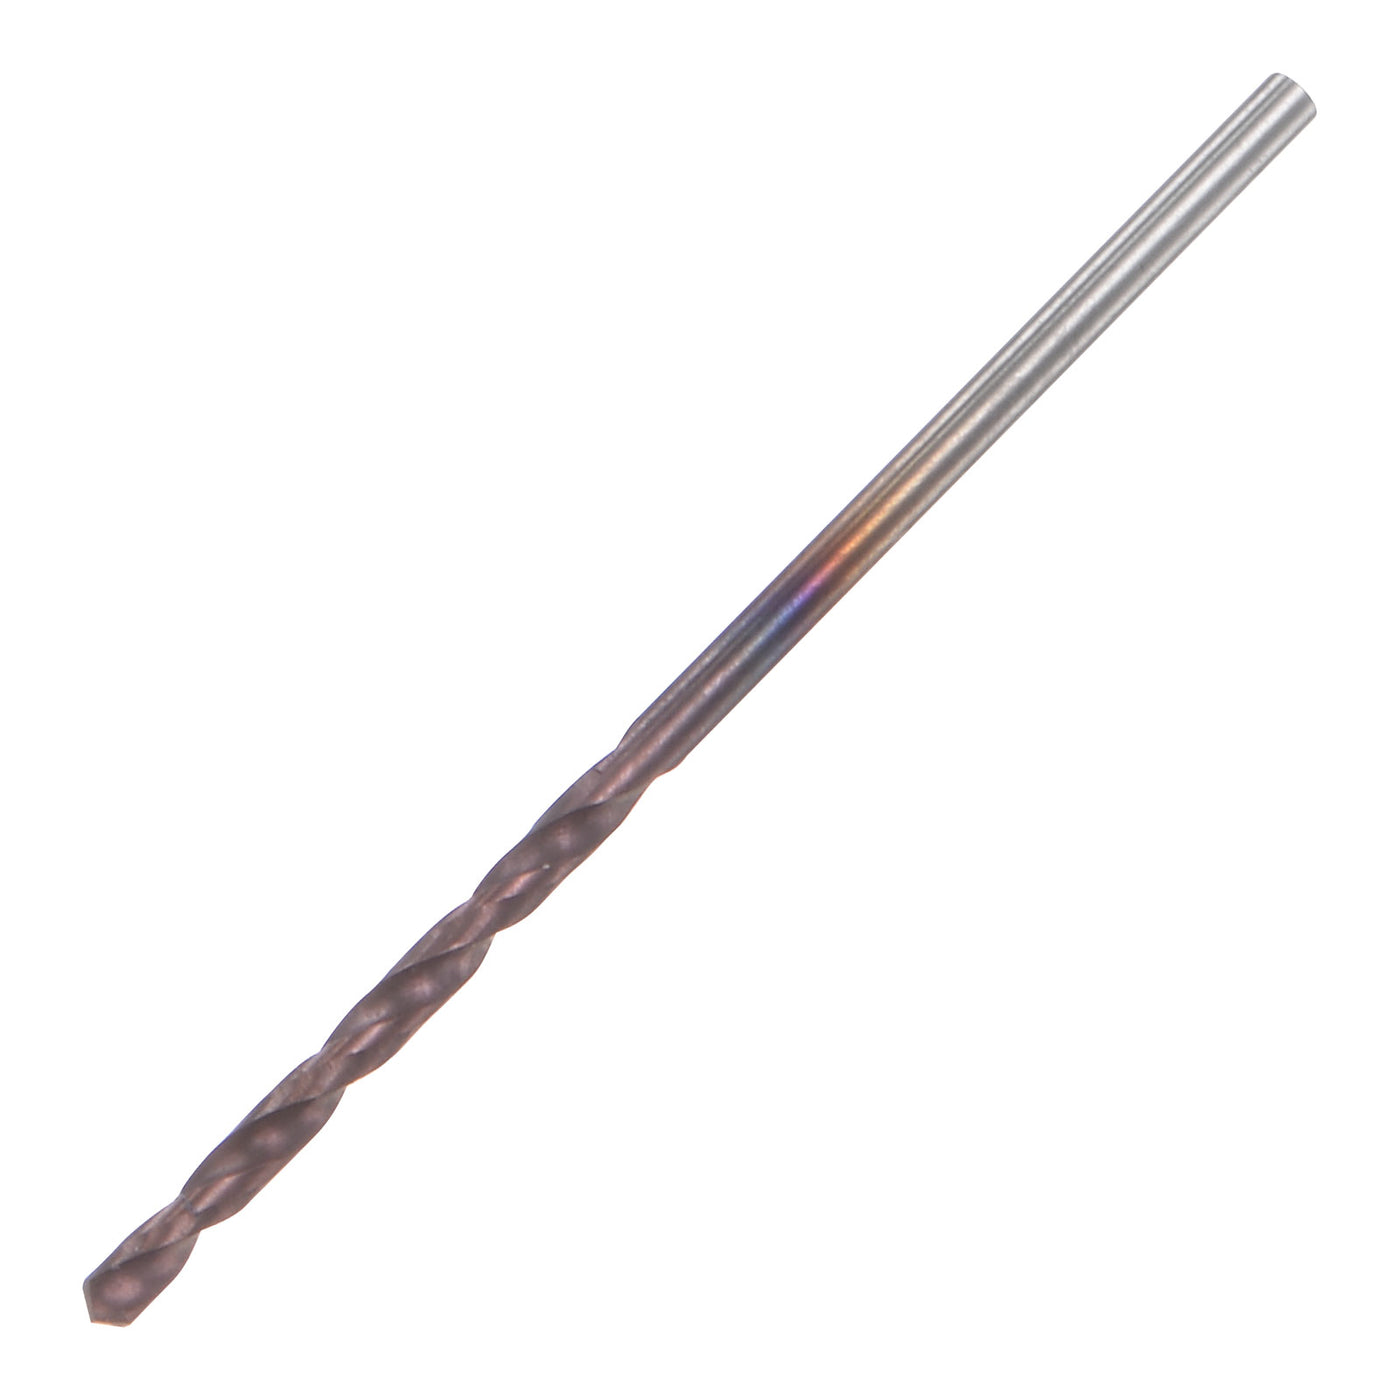 uxcell Uxcell 1.2mm DIN K45 Tungsten Carbide AlTiSin Coated Drill Bit for Stainless Steel